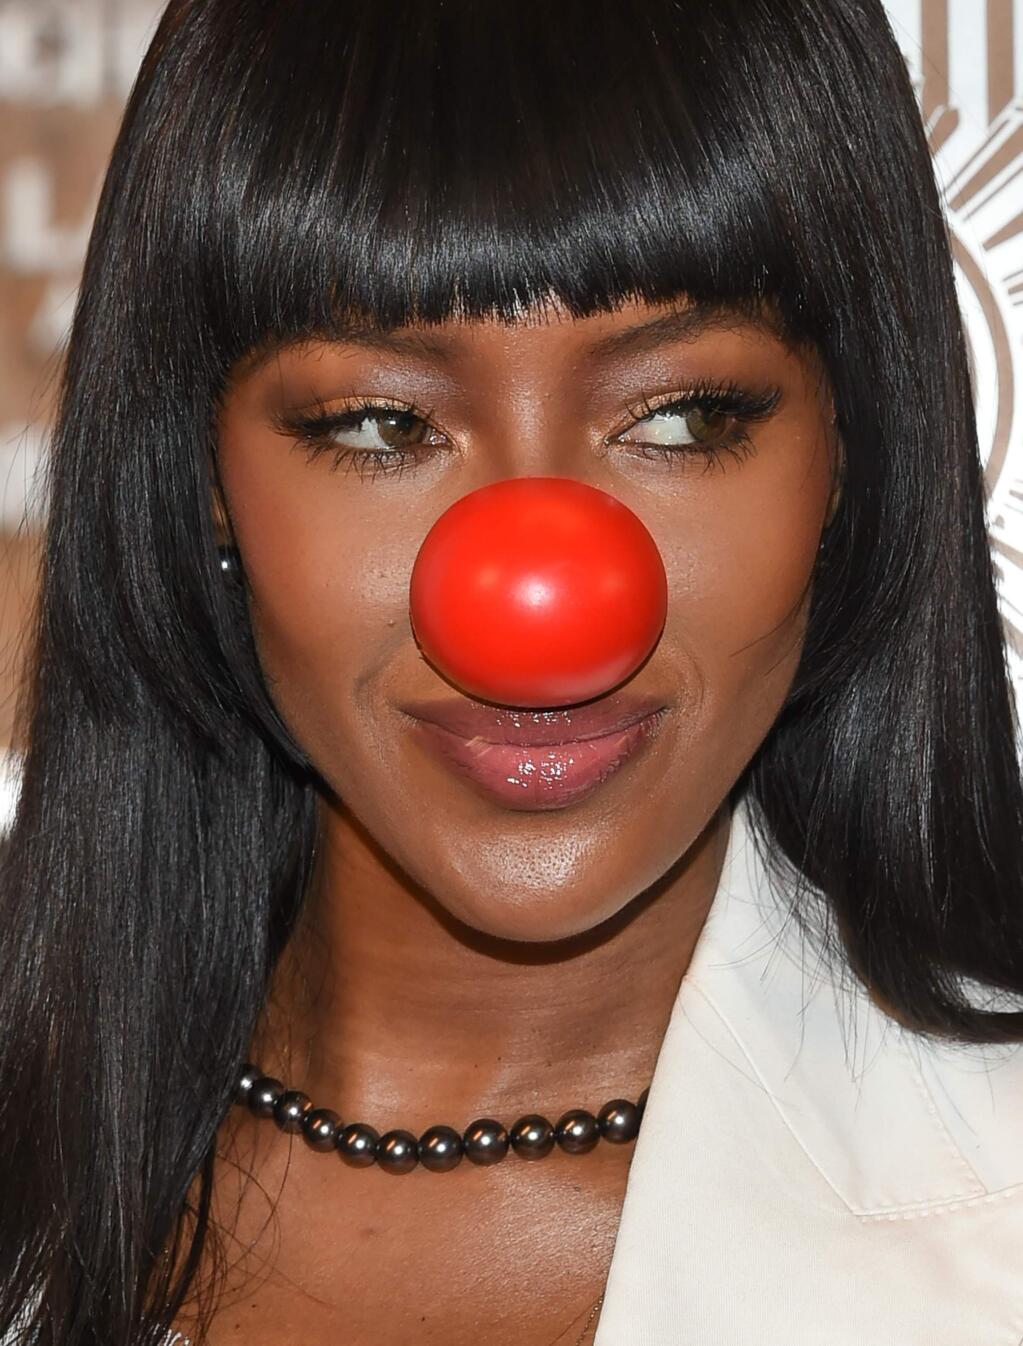 Model Naomi Campbell participates in the lighting the Empire State Building in honor of Red Nose Day on Tuesday, May 24, 2016, in New York. Red Nose Day is a national event to raise money and awareness for children in need. (Photo by Evan Agostini/Invision/AP)